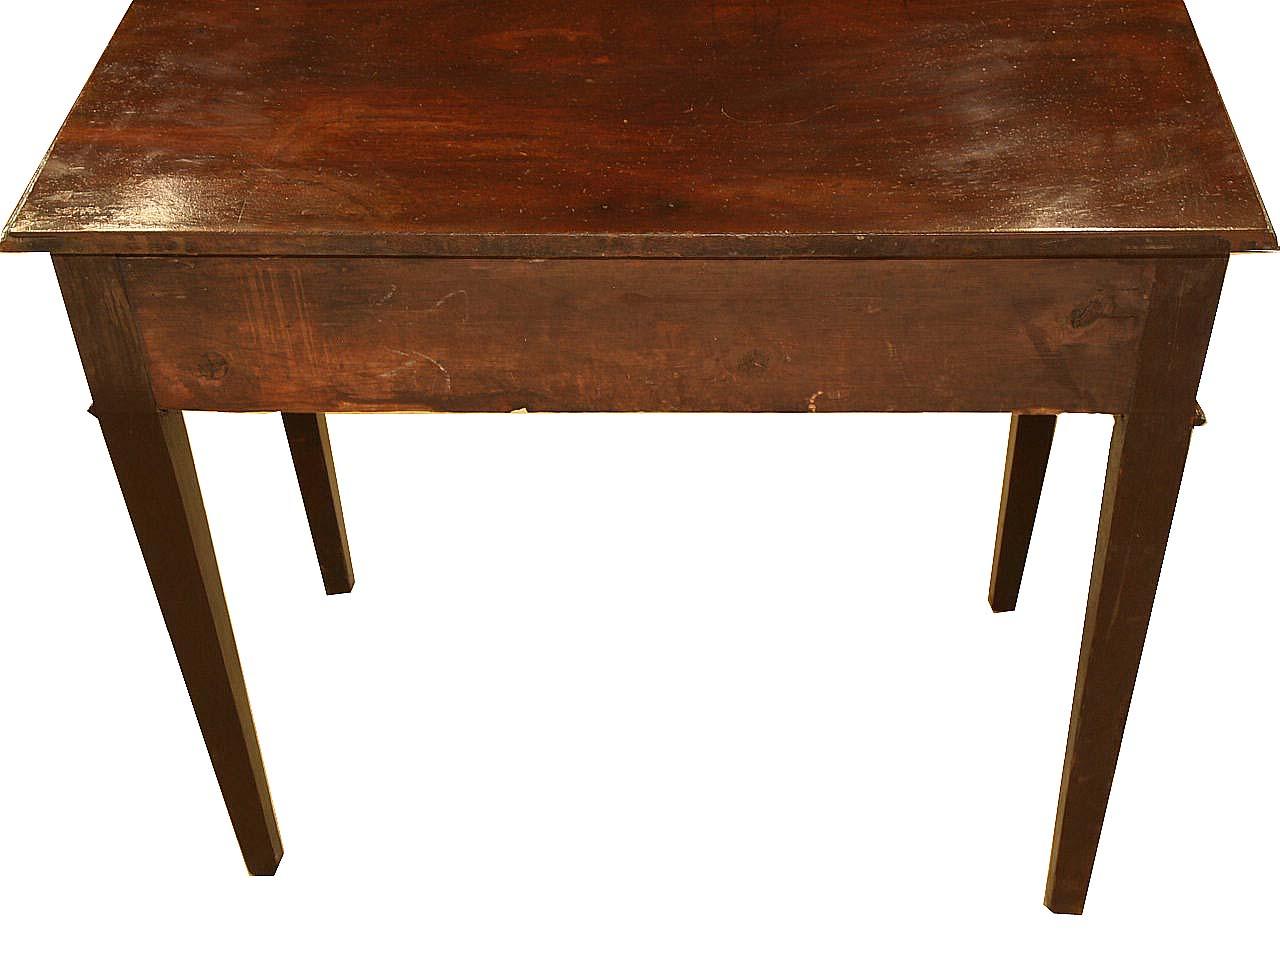 Early 19th Century Hepplewhite Mahogany Side Table For Sale